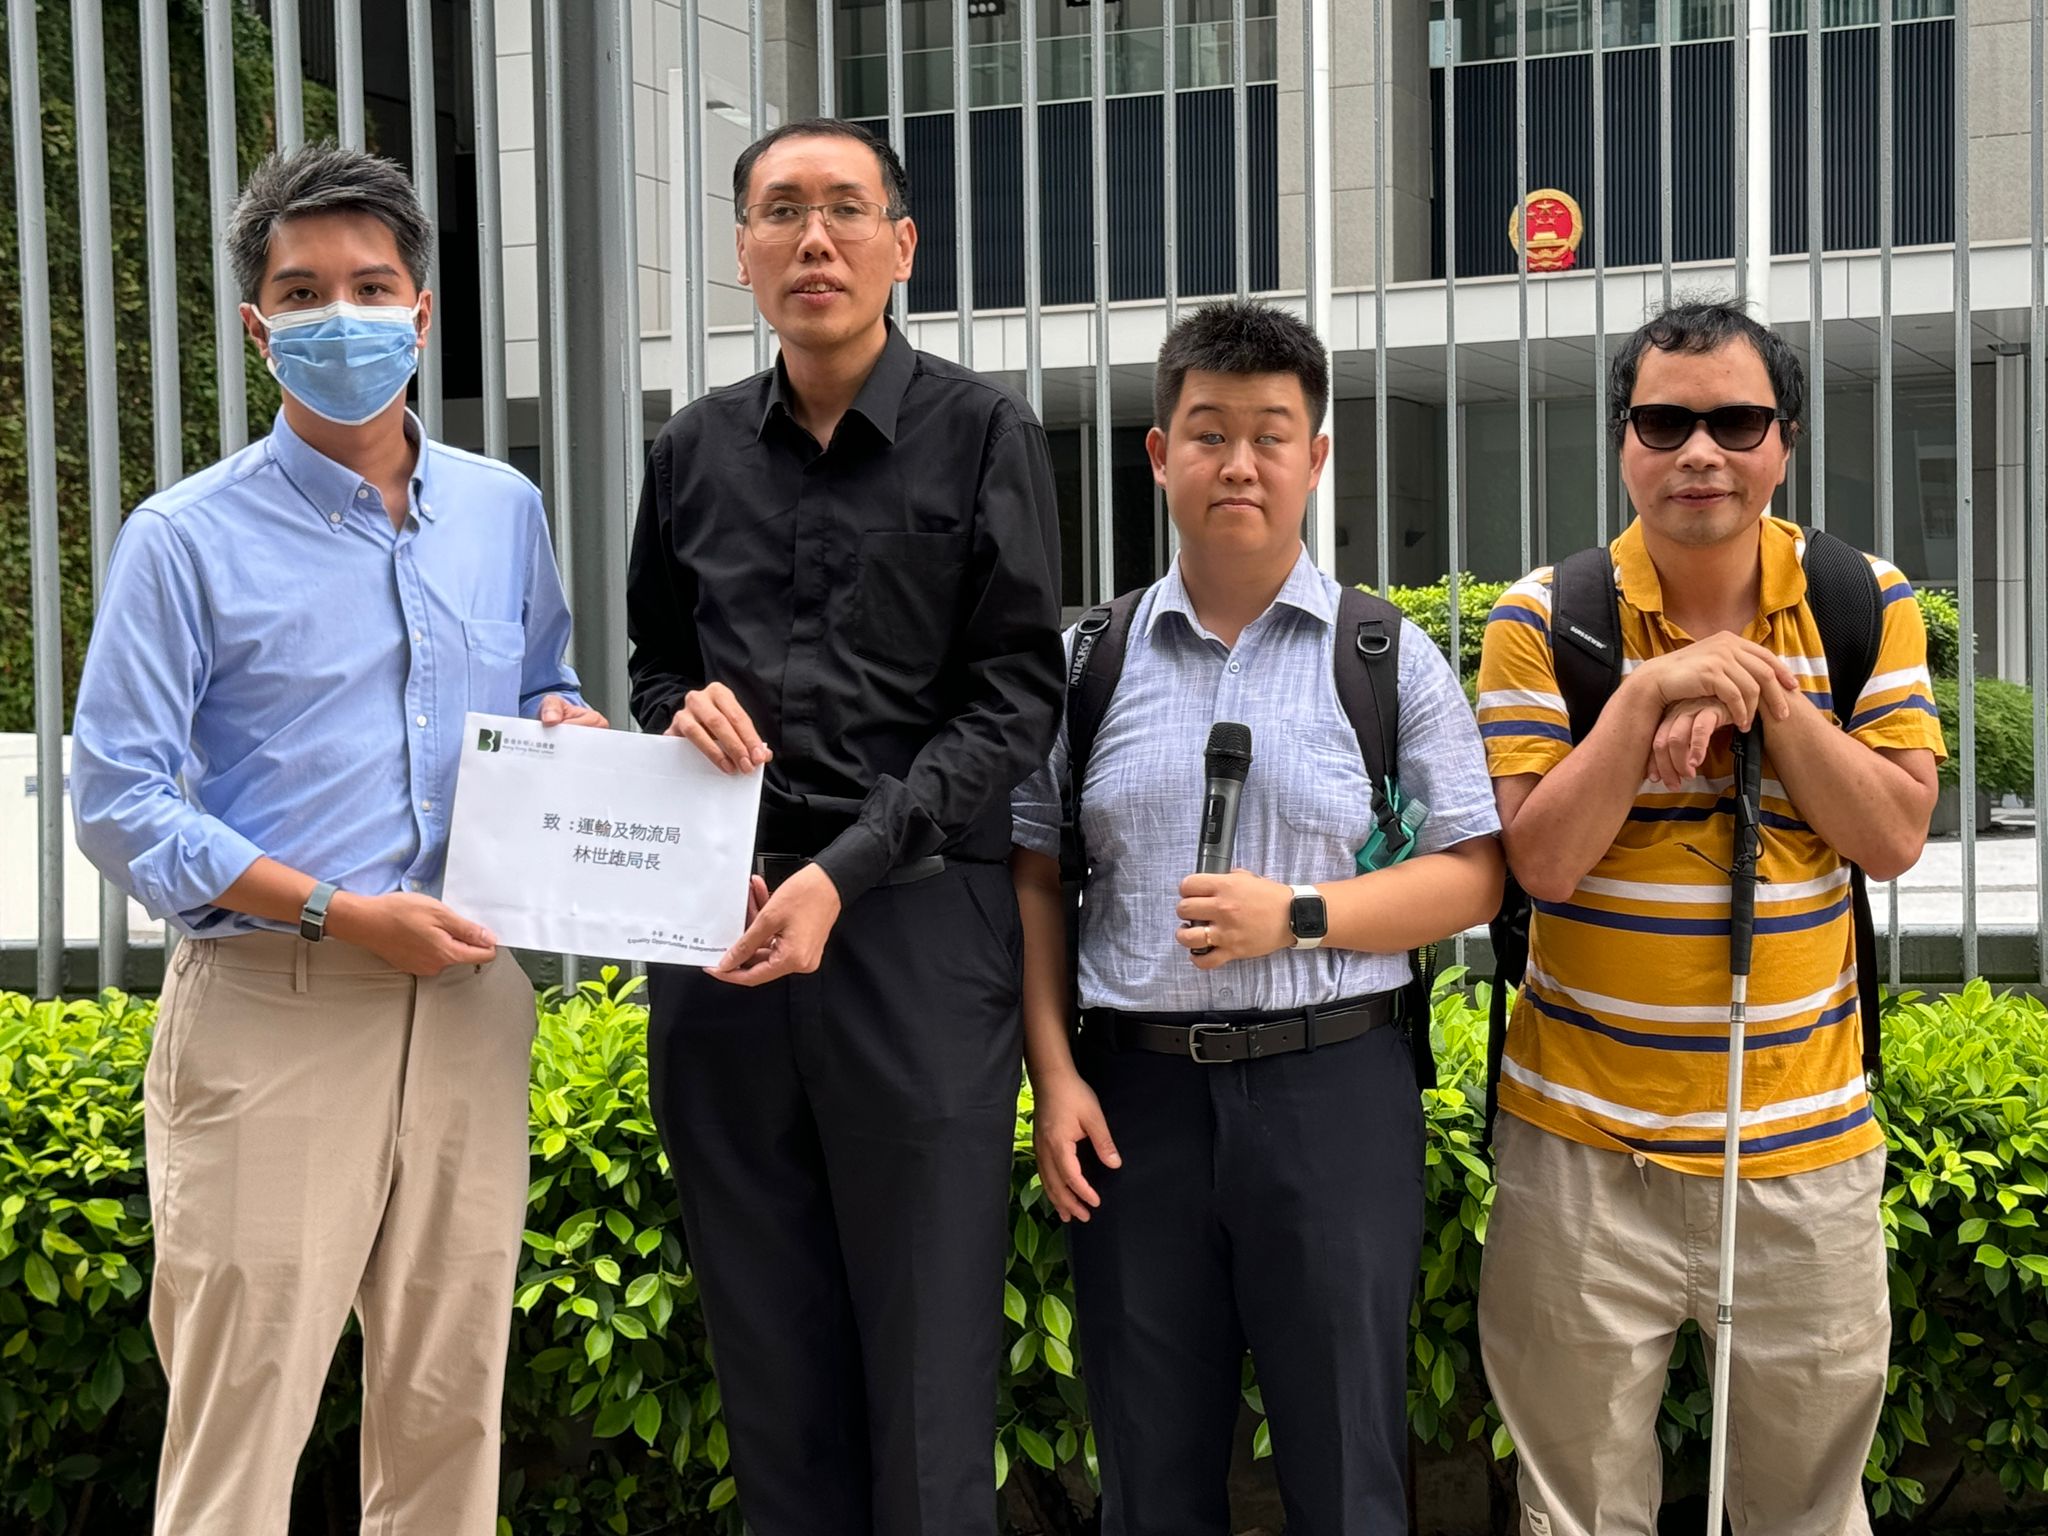  The Blind Union sent the open letter to the Secretary for Transport and Logistics, Mr. Lam Sai-hung